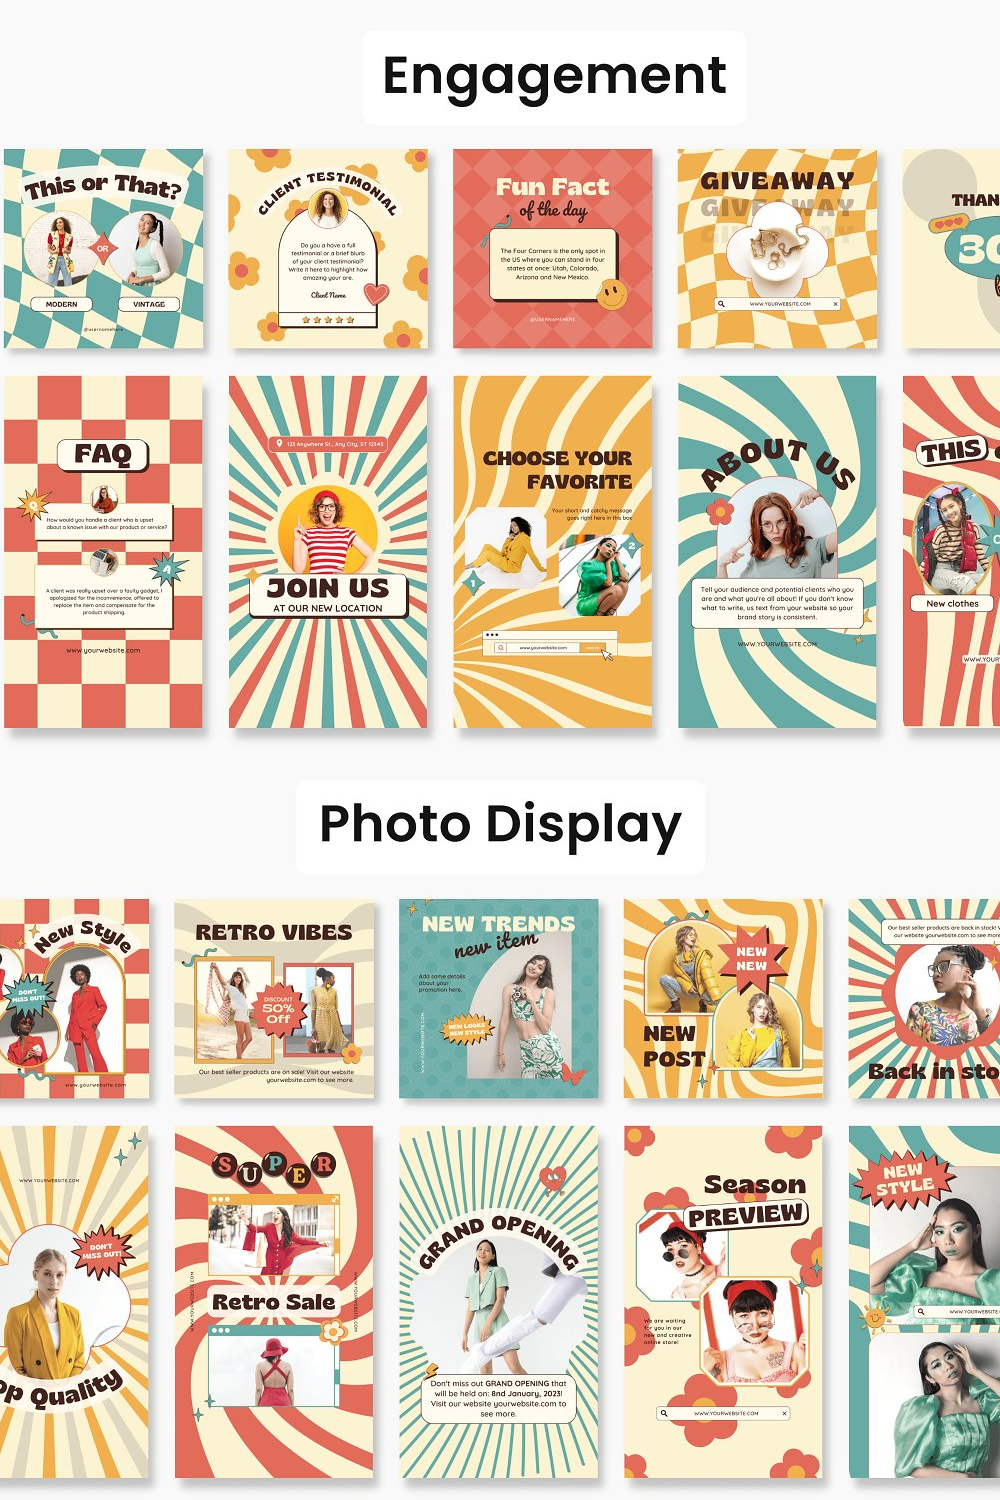 Pinterest images of retro pictures and more.